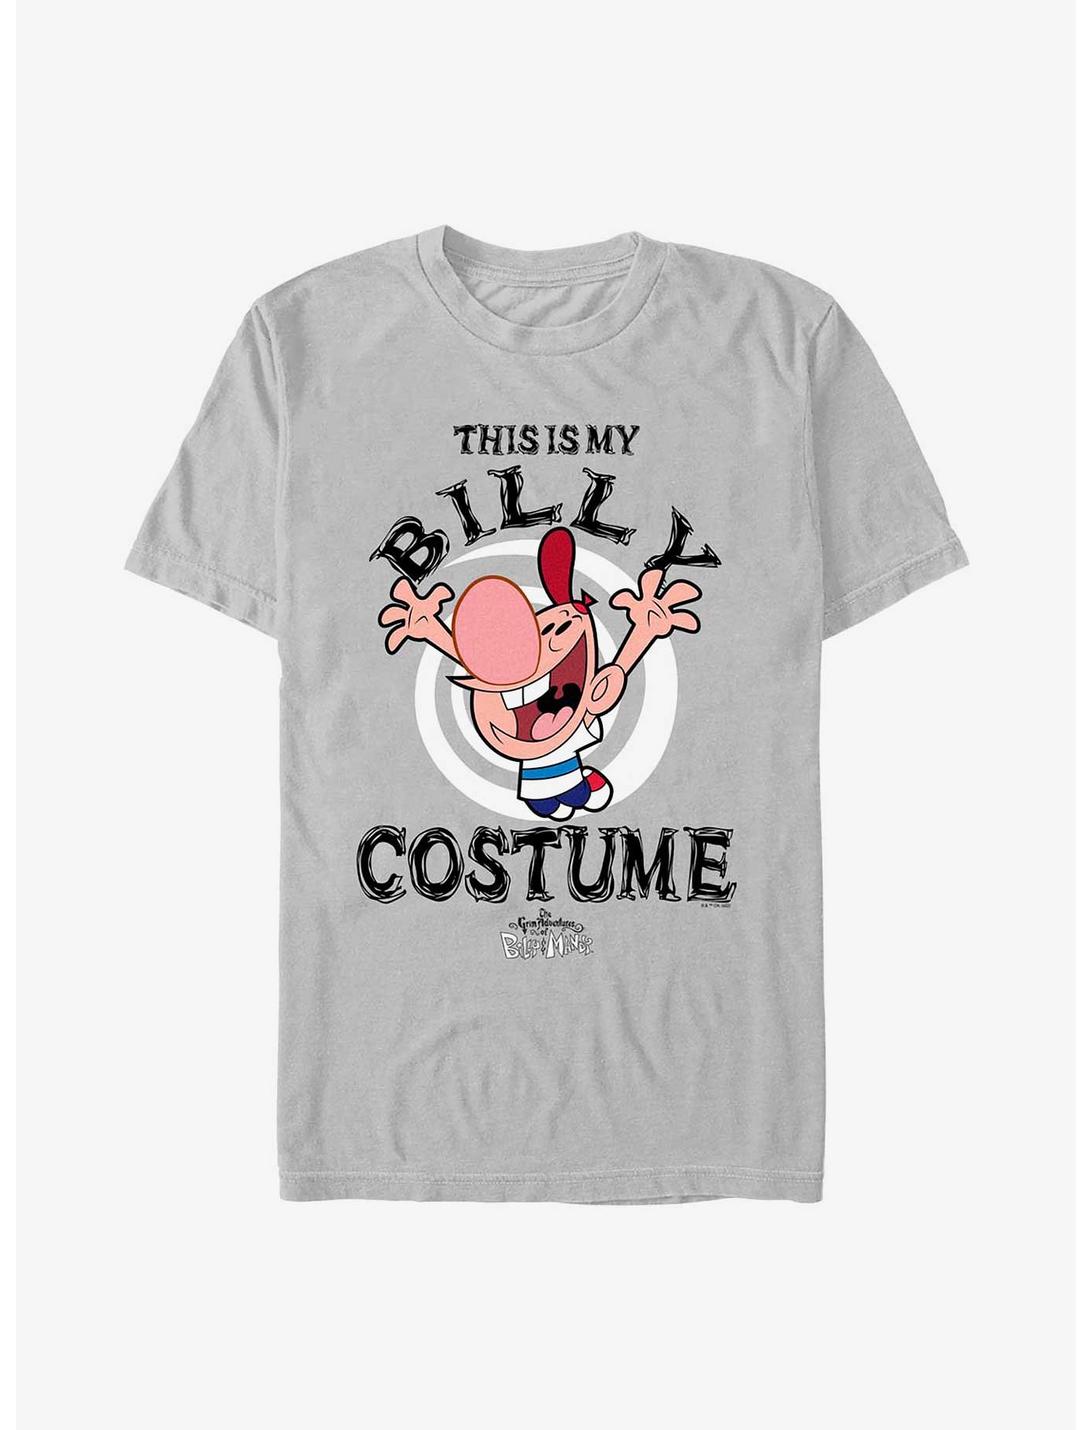 Cartoon Network The Grim Adventures of Billy & Mandy My Billy Costume T-Shirt, SILVER, hi-res